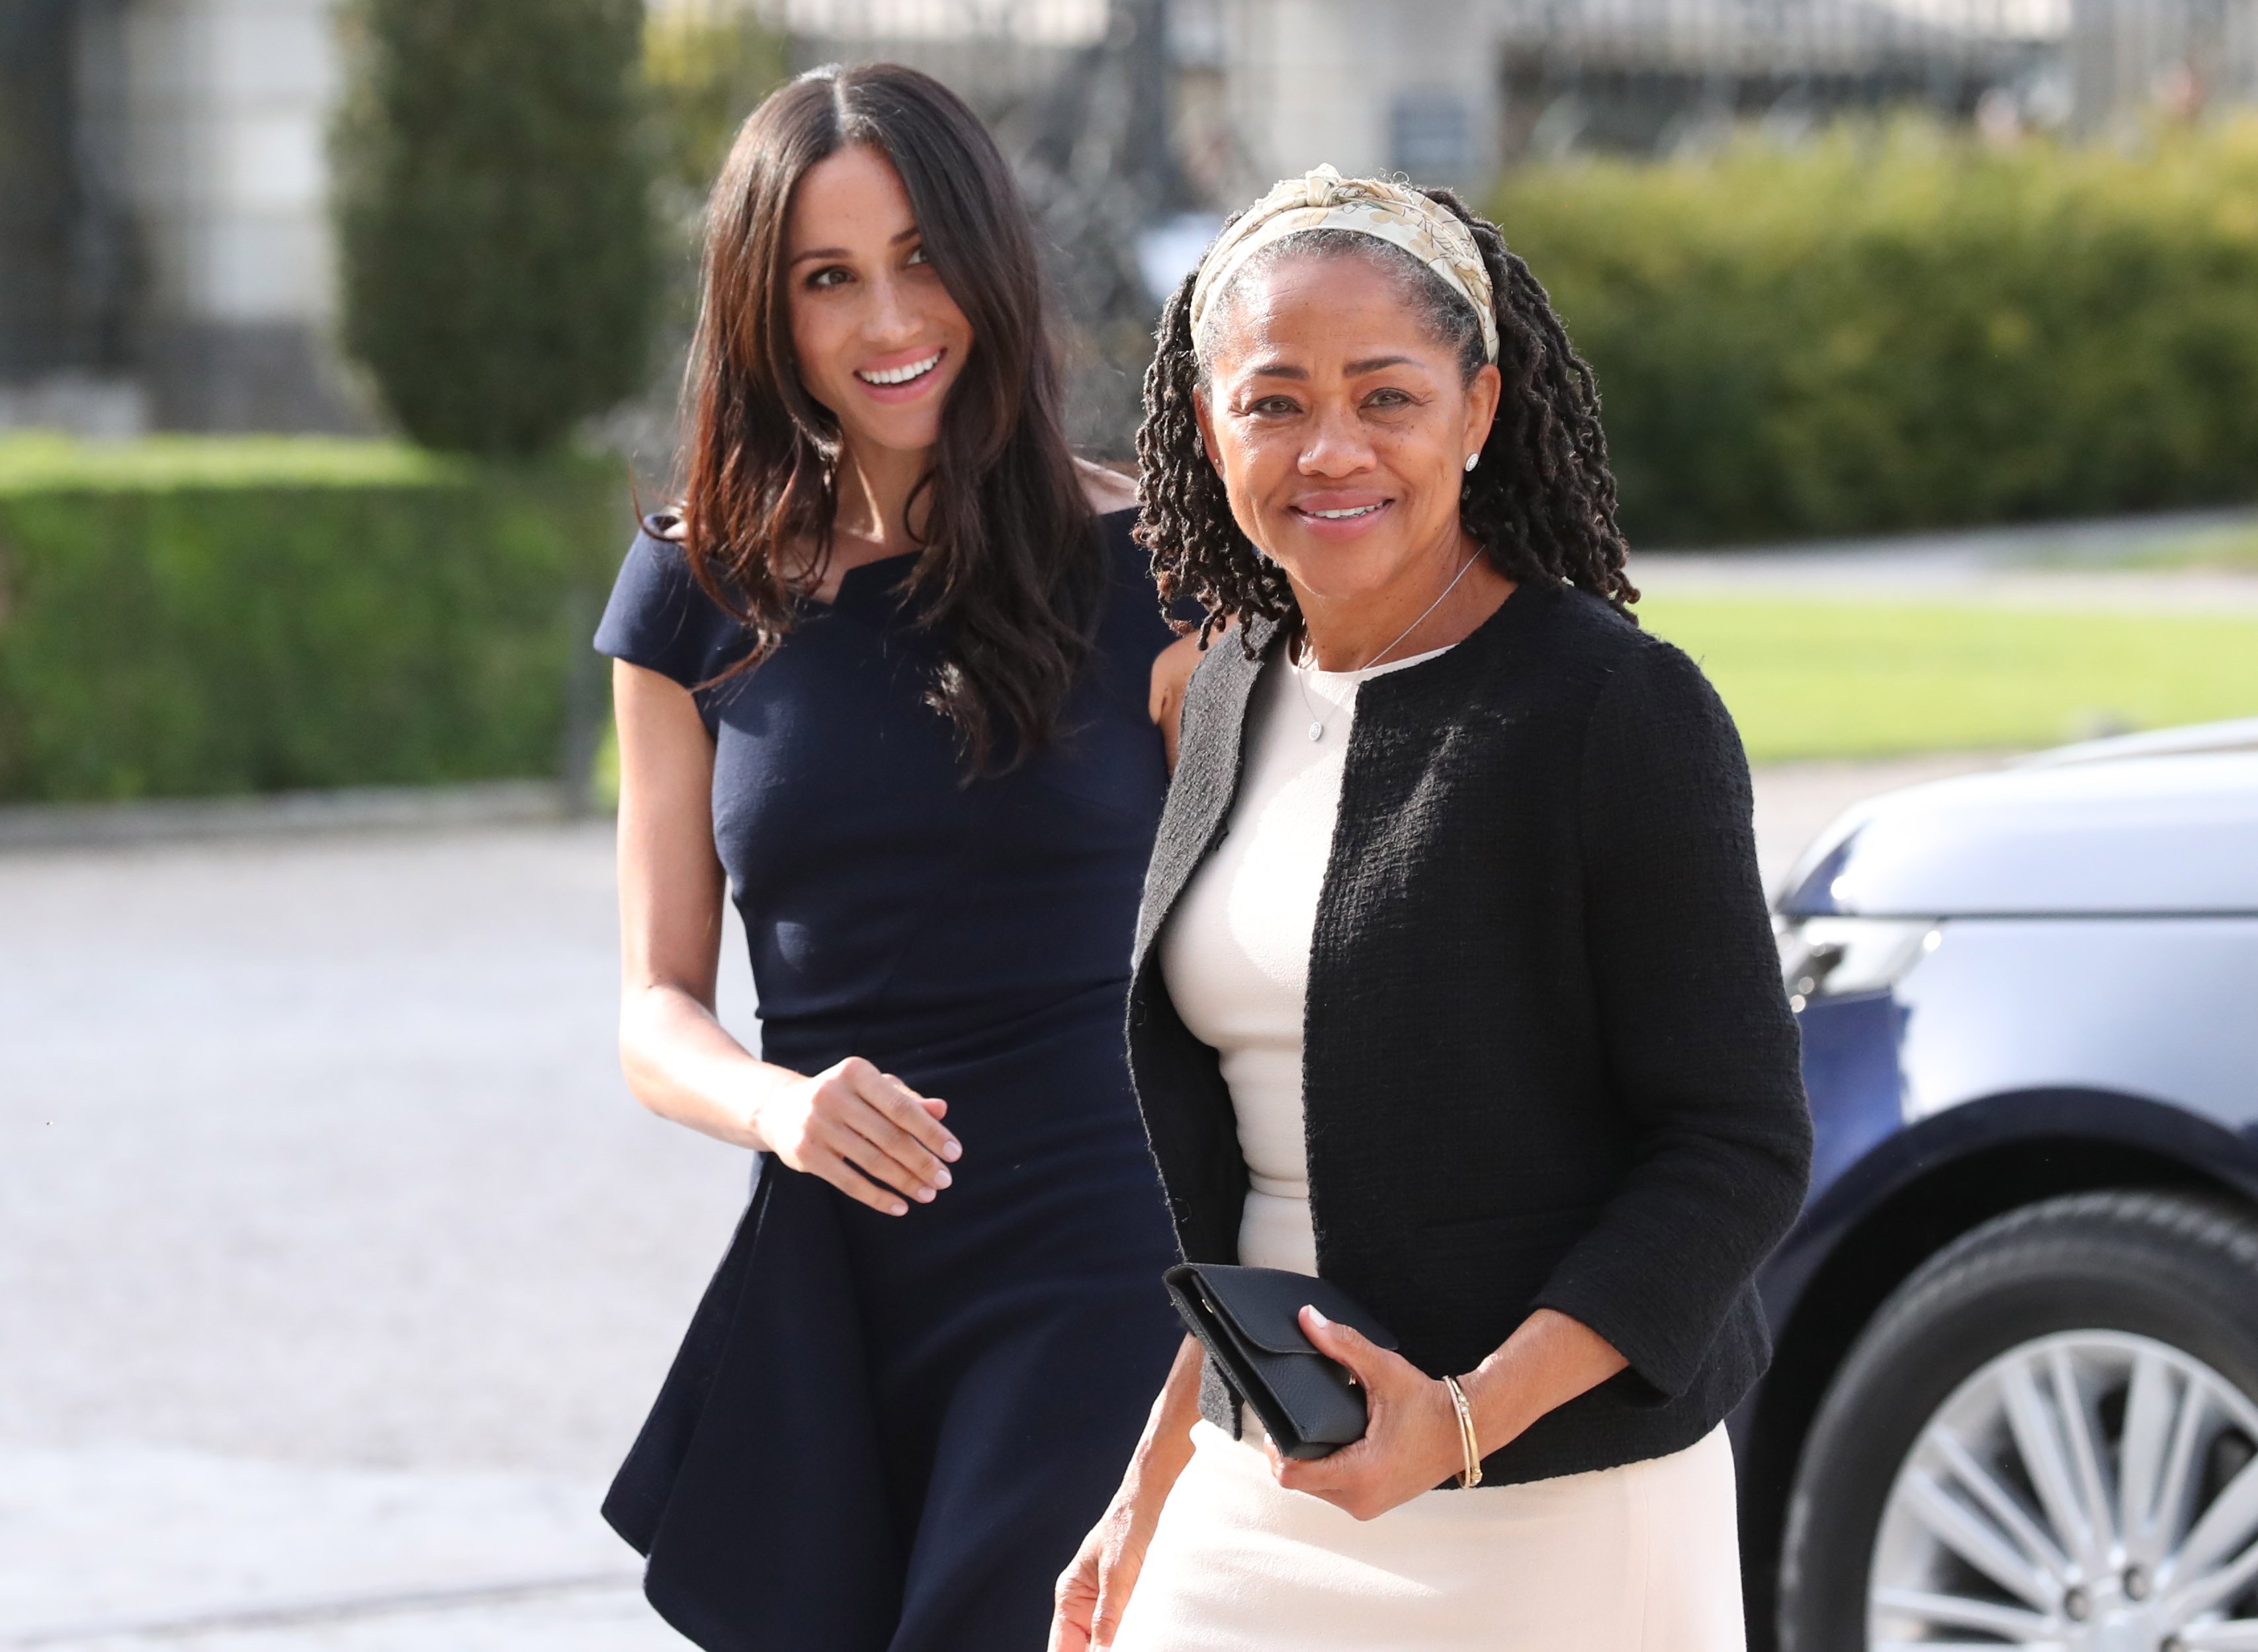 Meghan Markle and her mother, Doria Ragland arrive the night before her wedding to Prince Harry on May 18, 2018 in Berkshire, England. | Source: Getty Images.